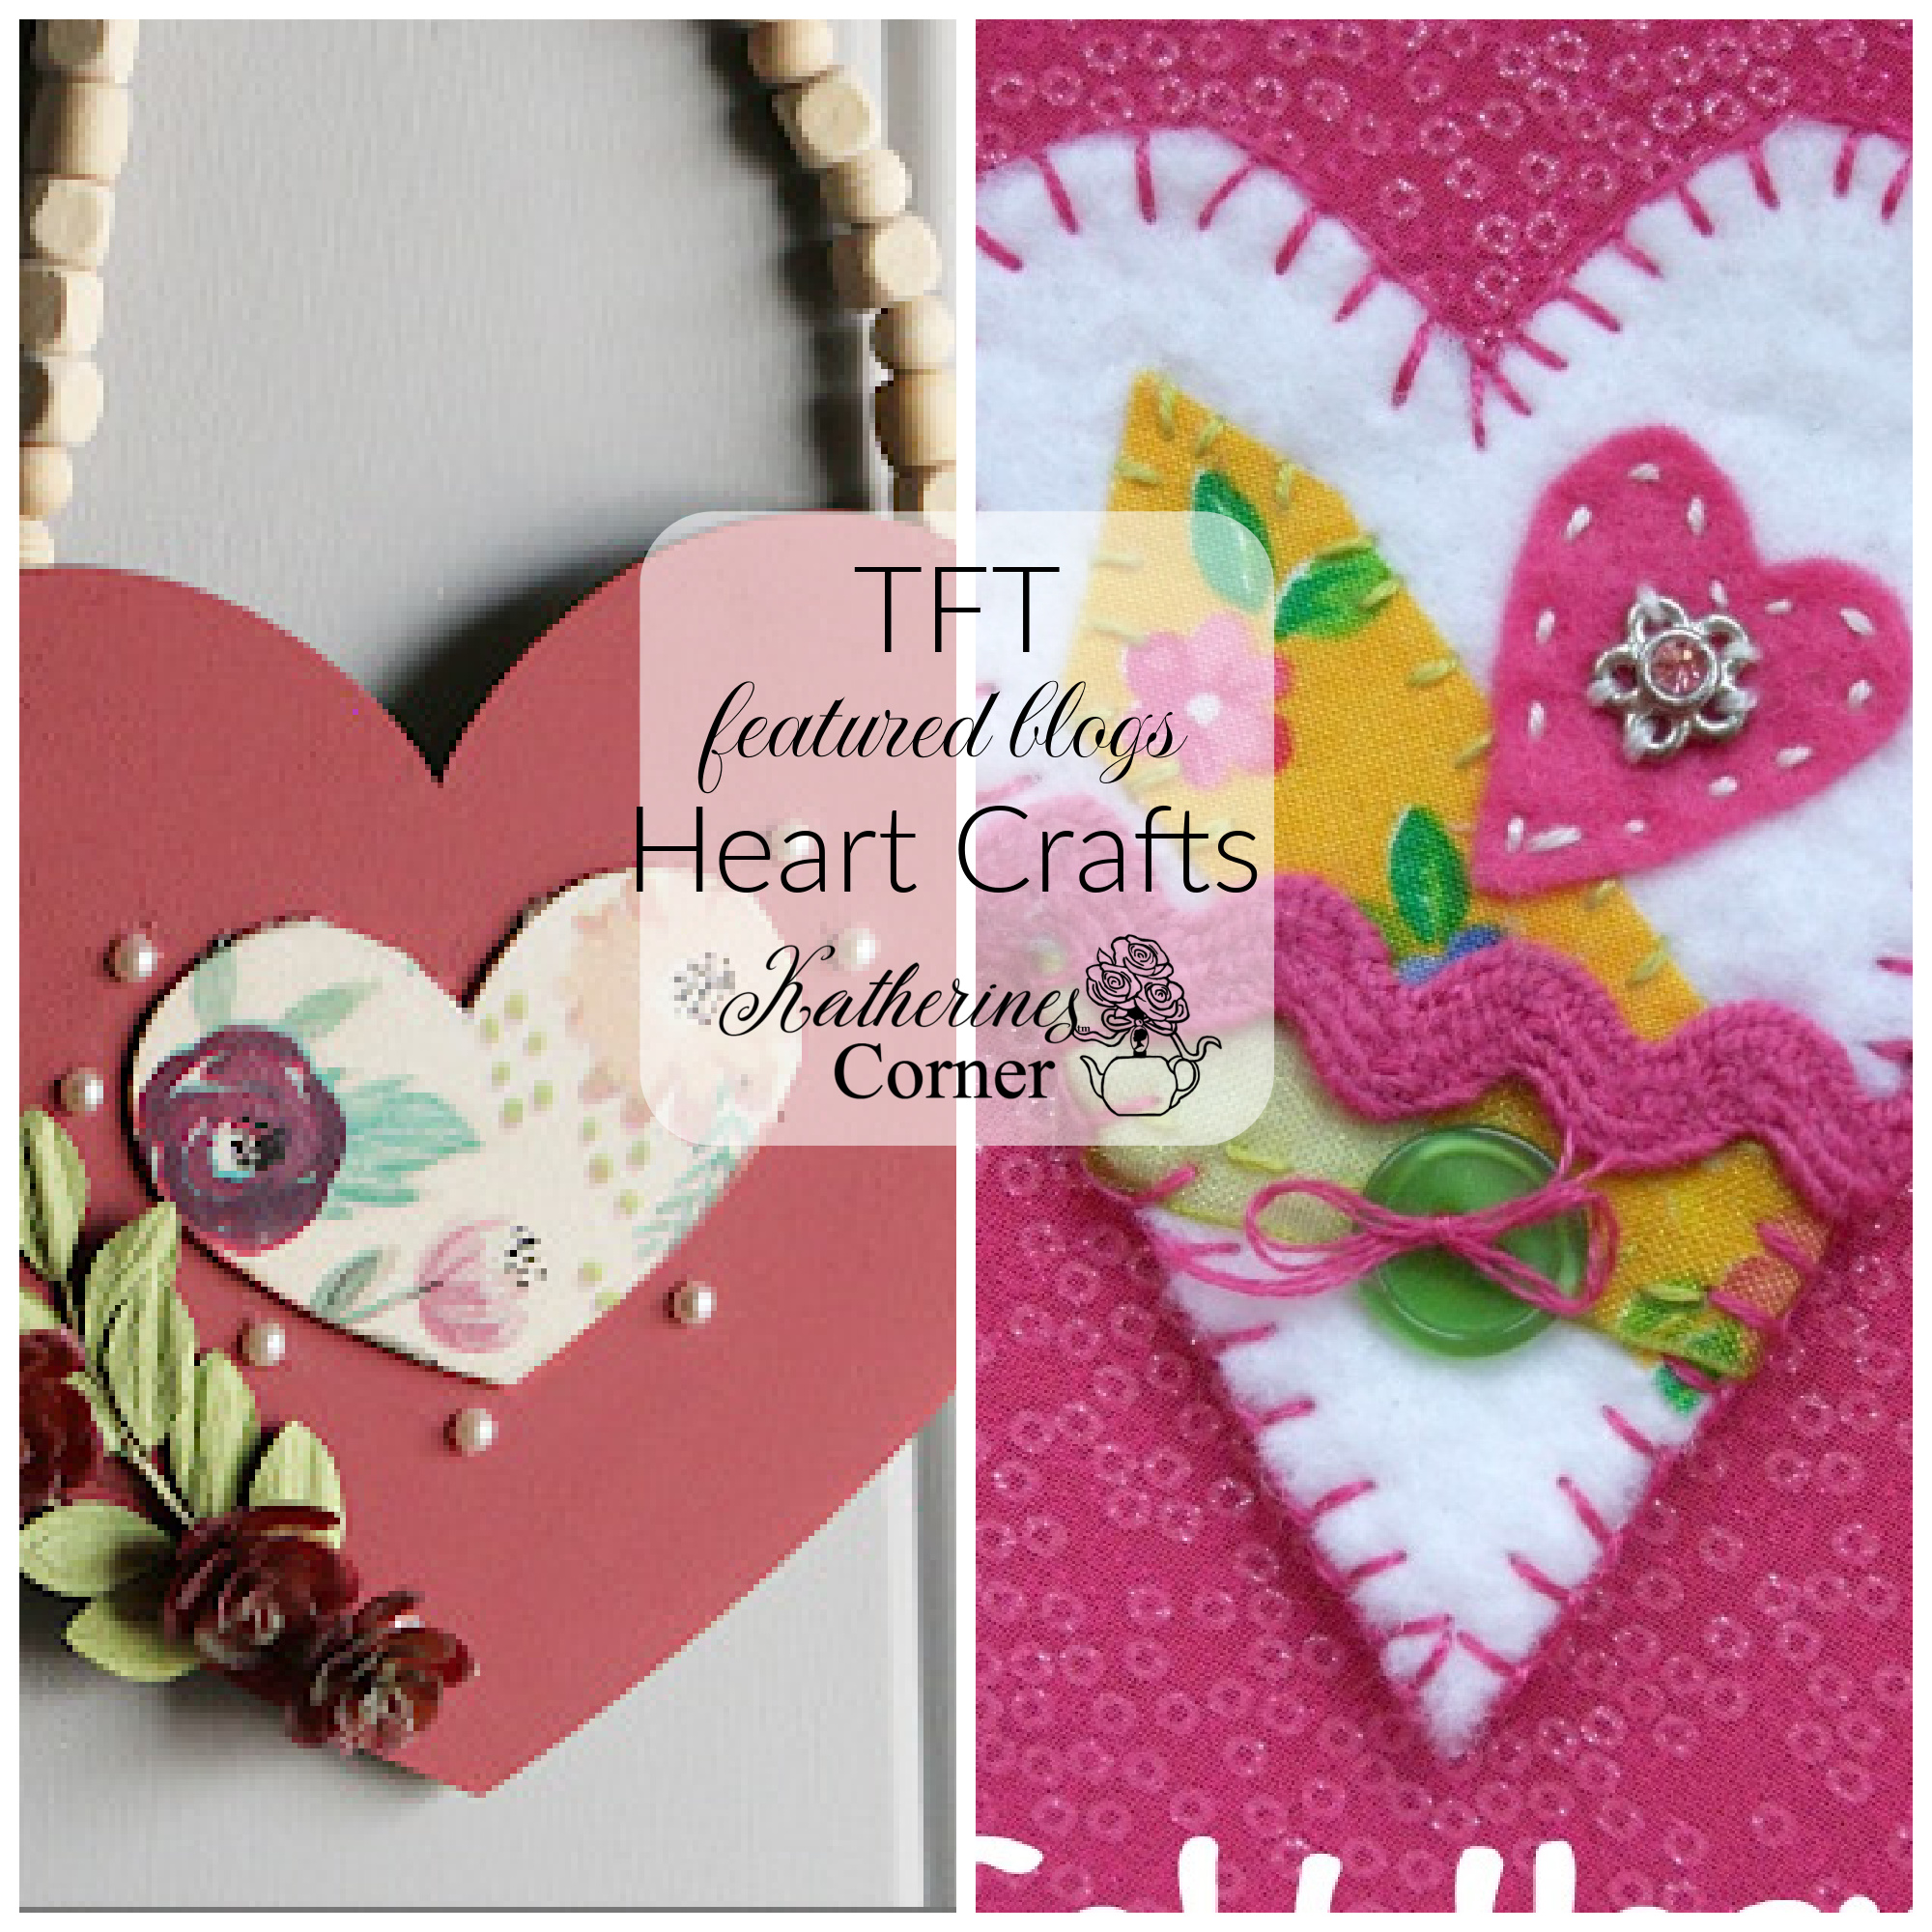 Crafty Hearts and the TFT blog hop